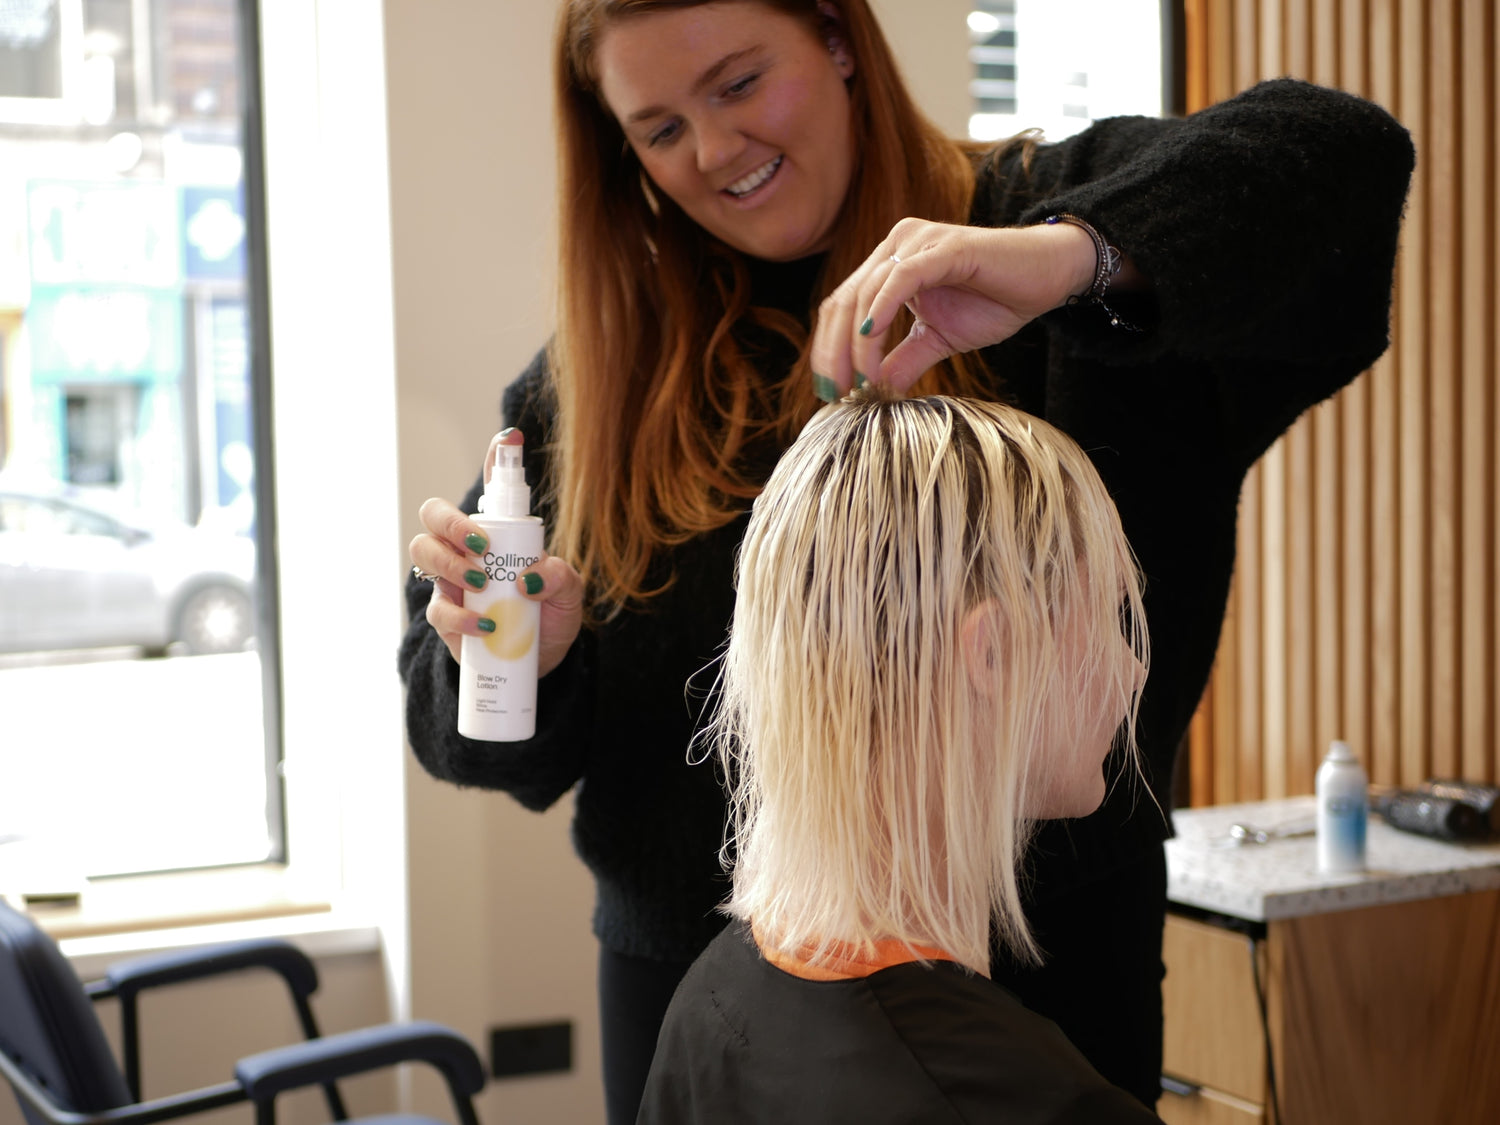 Applying Collinge & Co Blow Dry Lotion